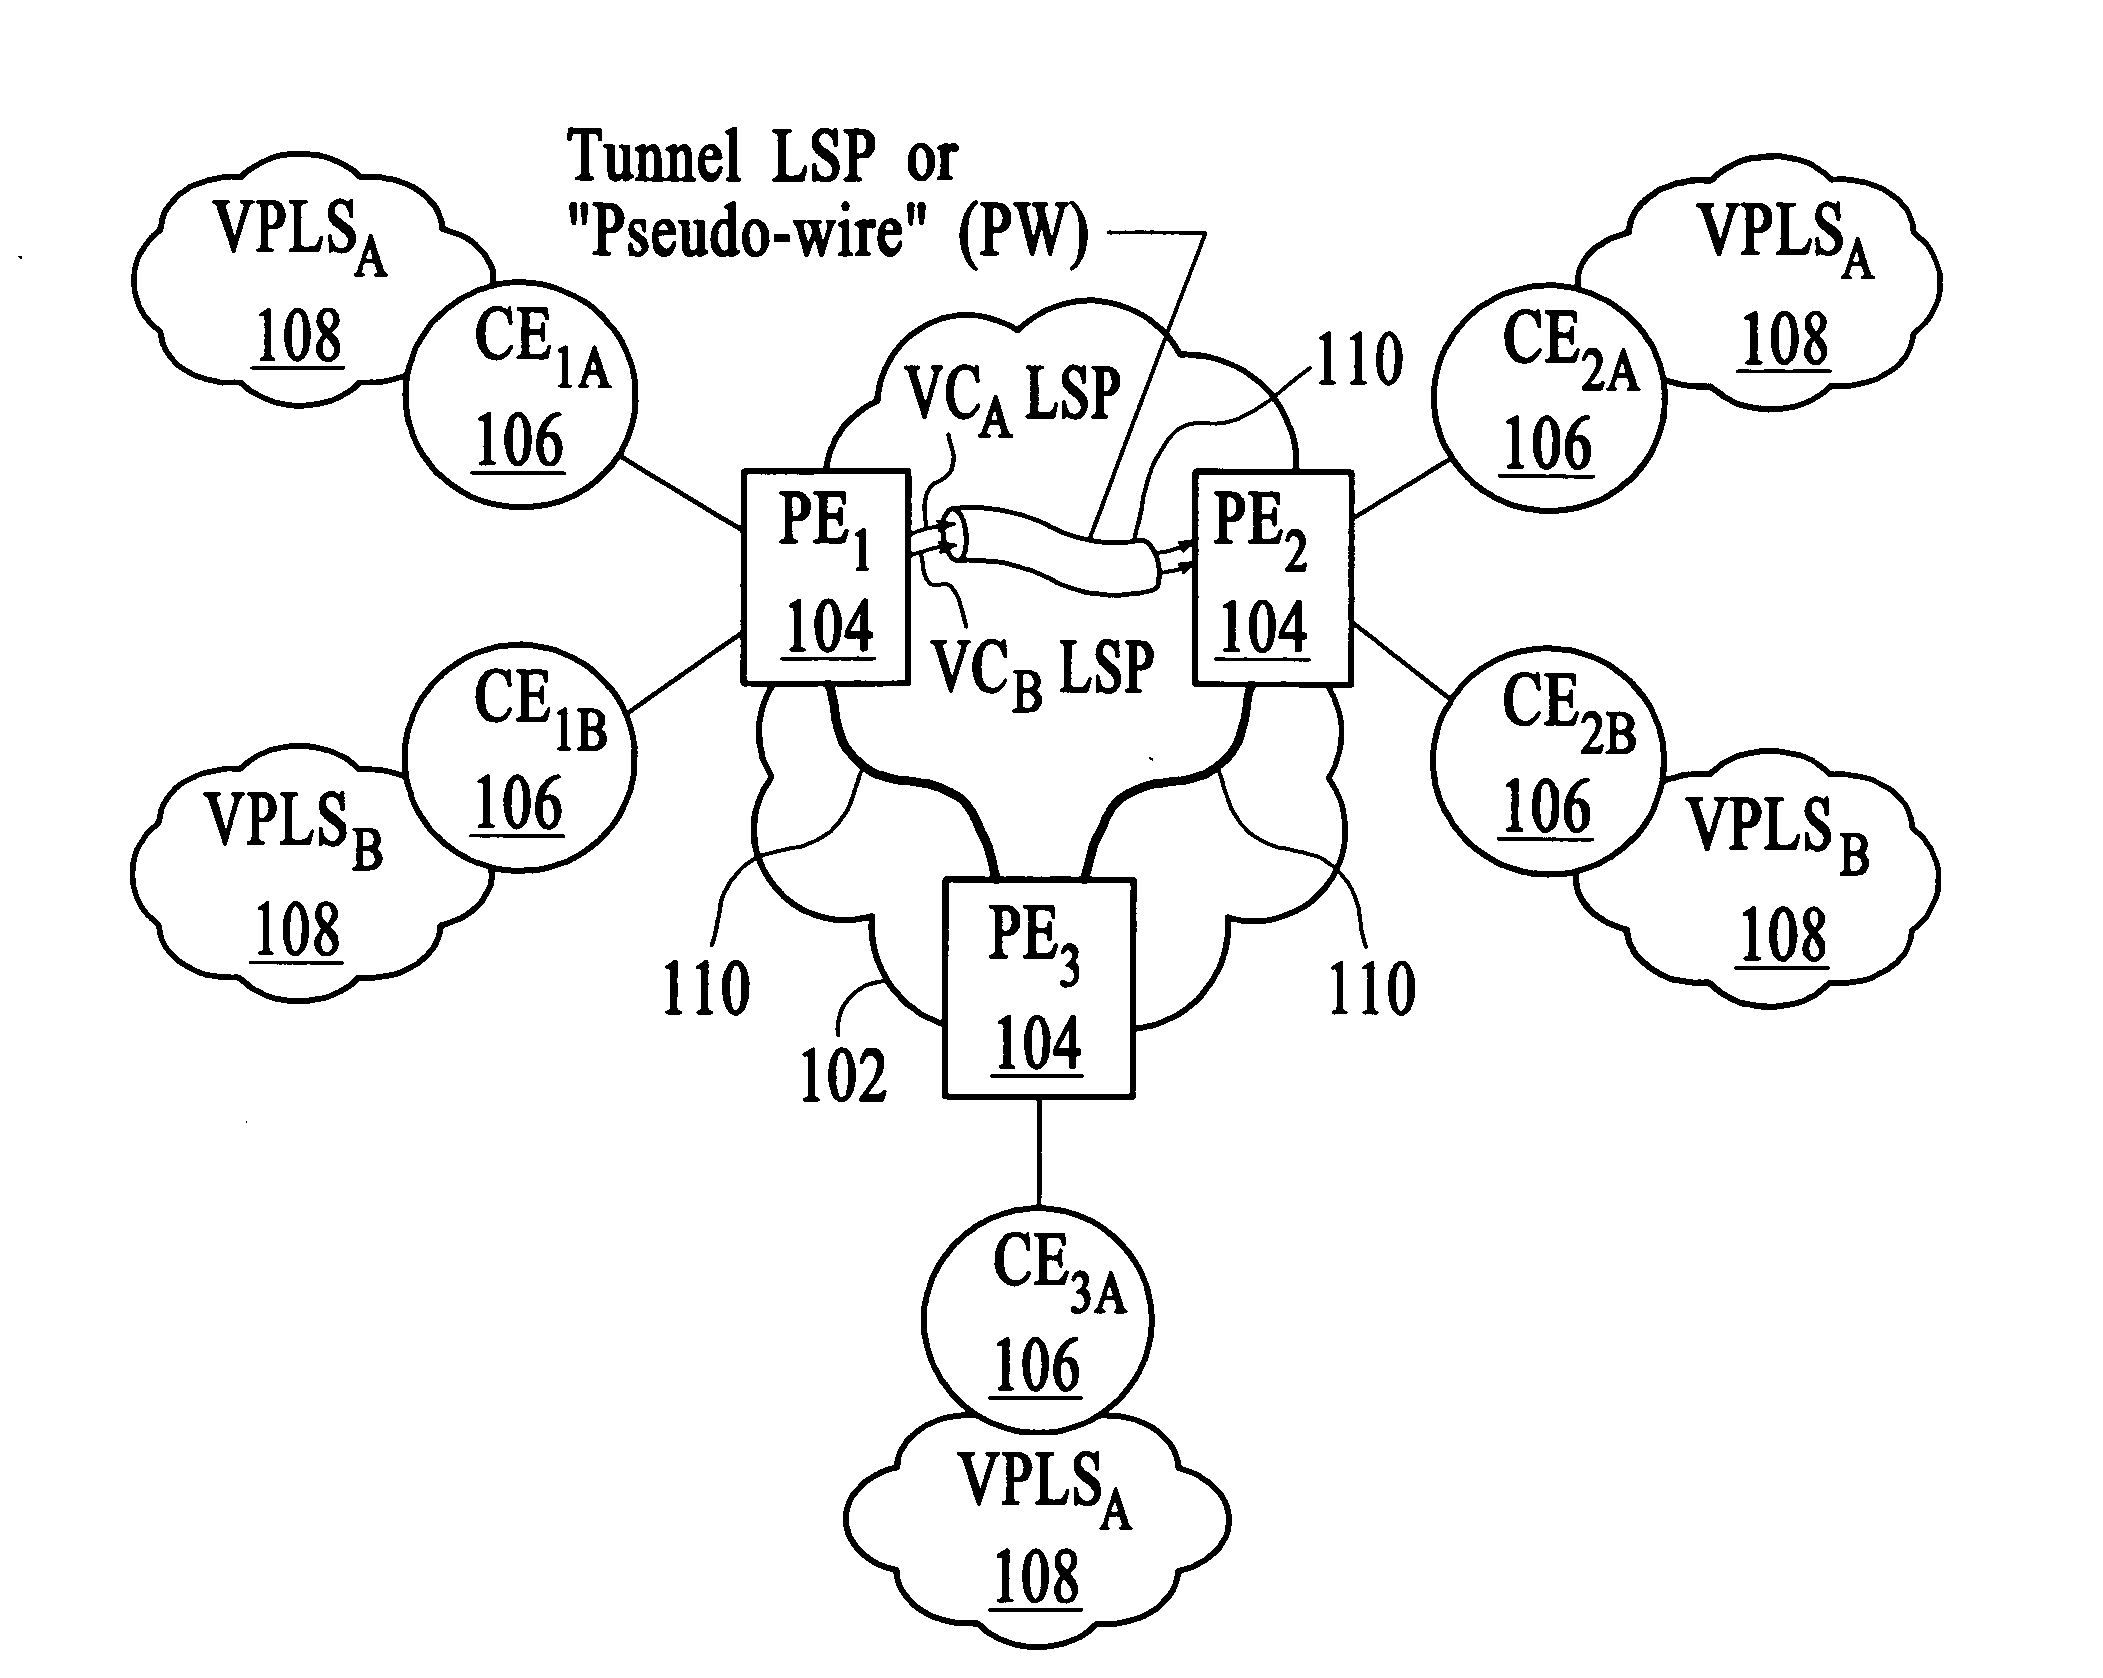 Obtaining path information related to a virtual private LAN services (VPLS) based network